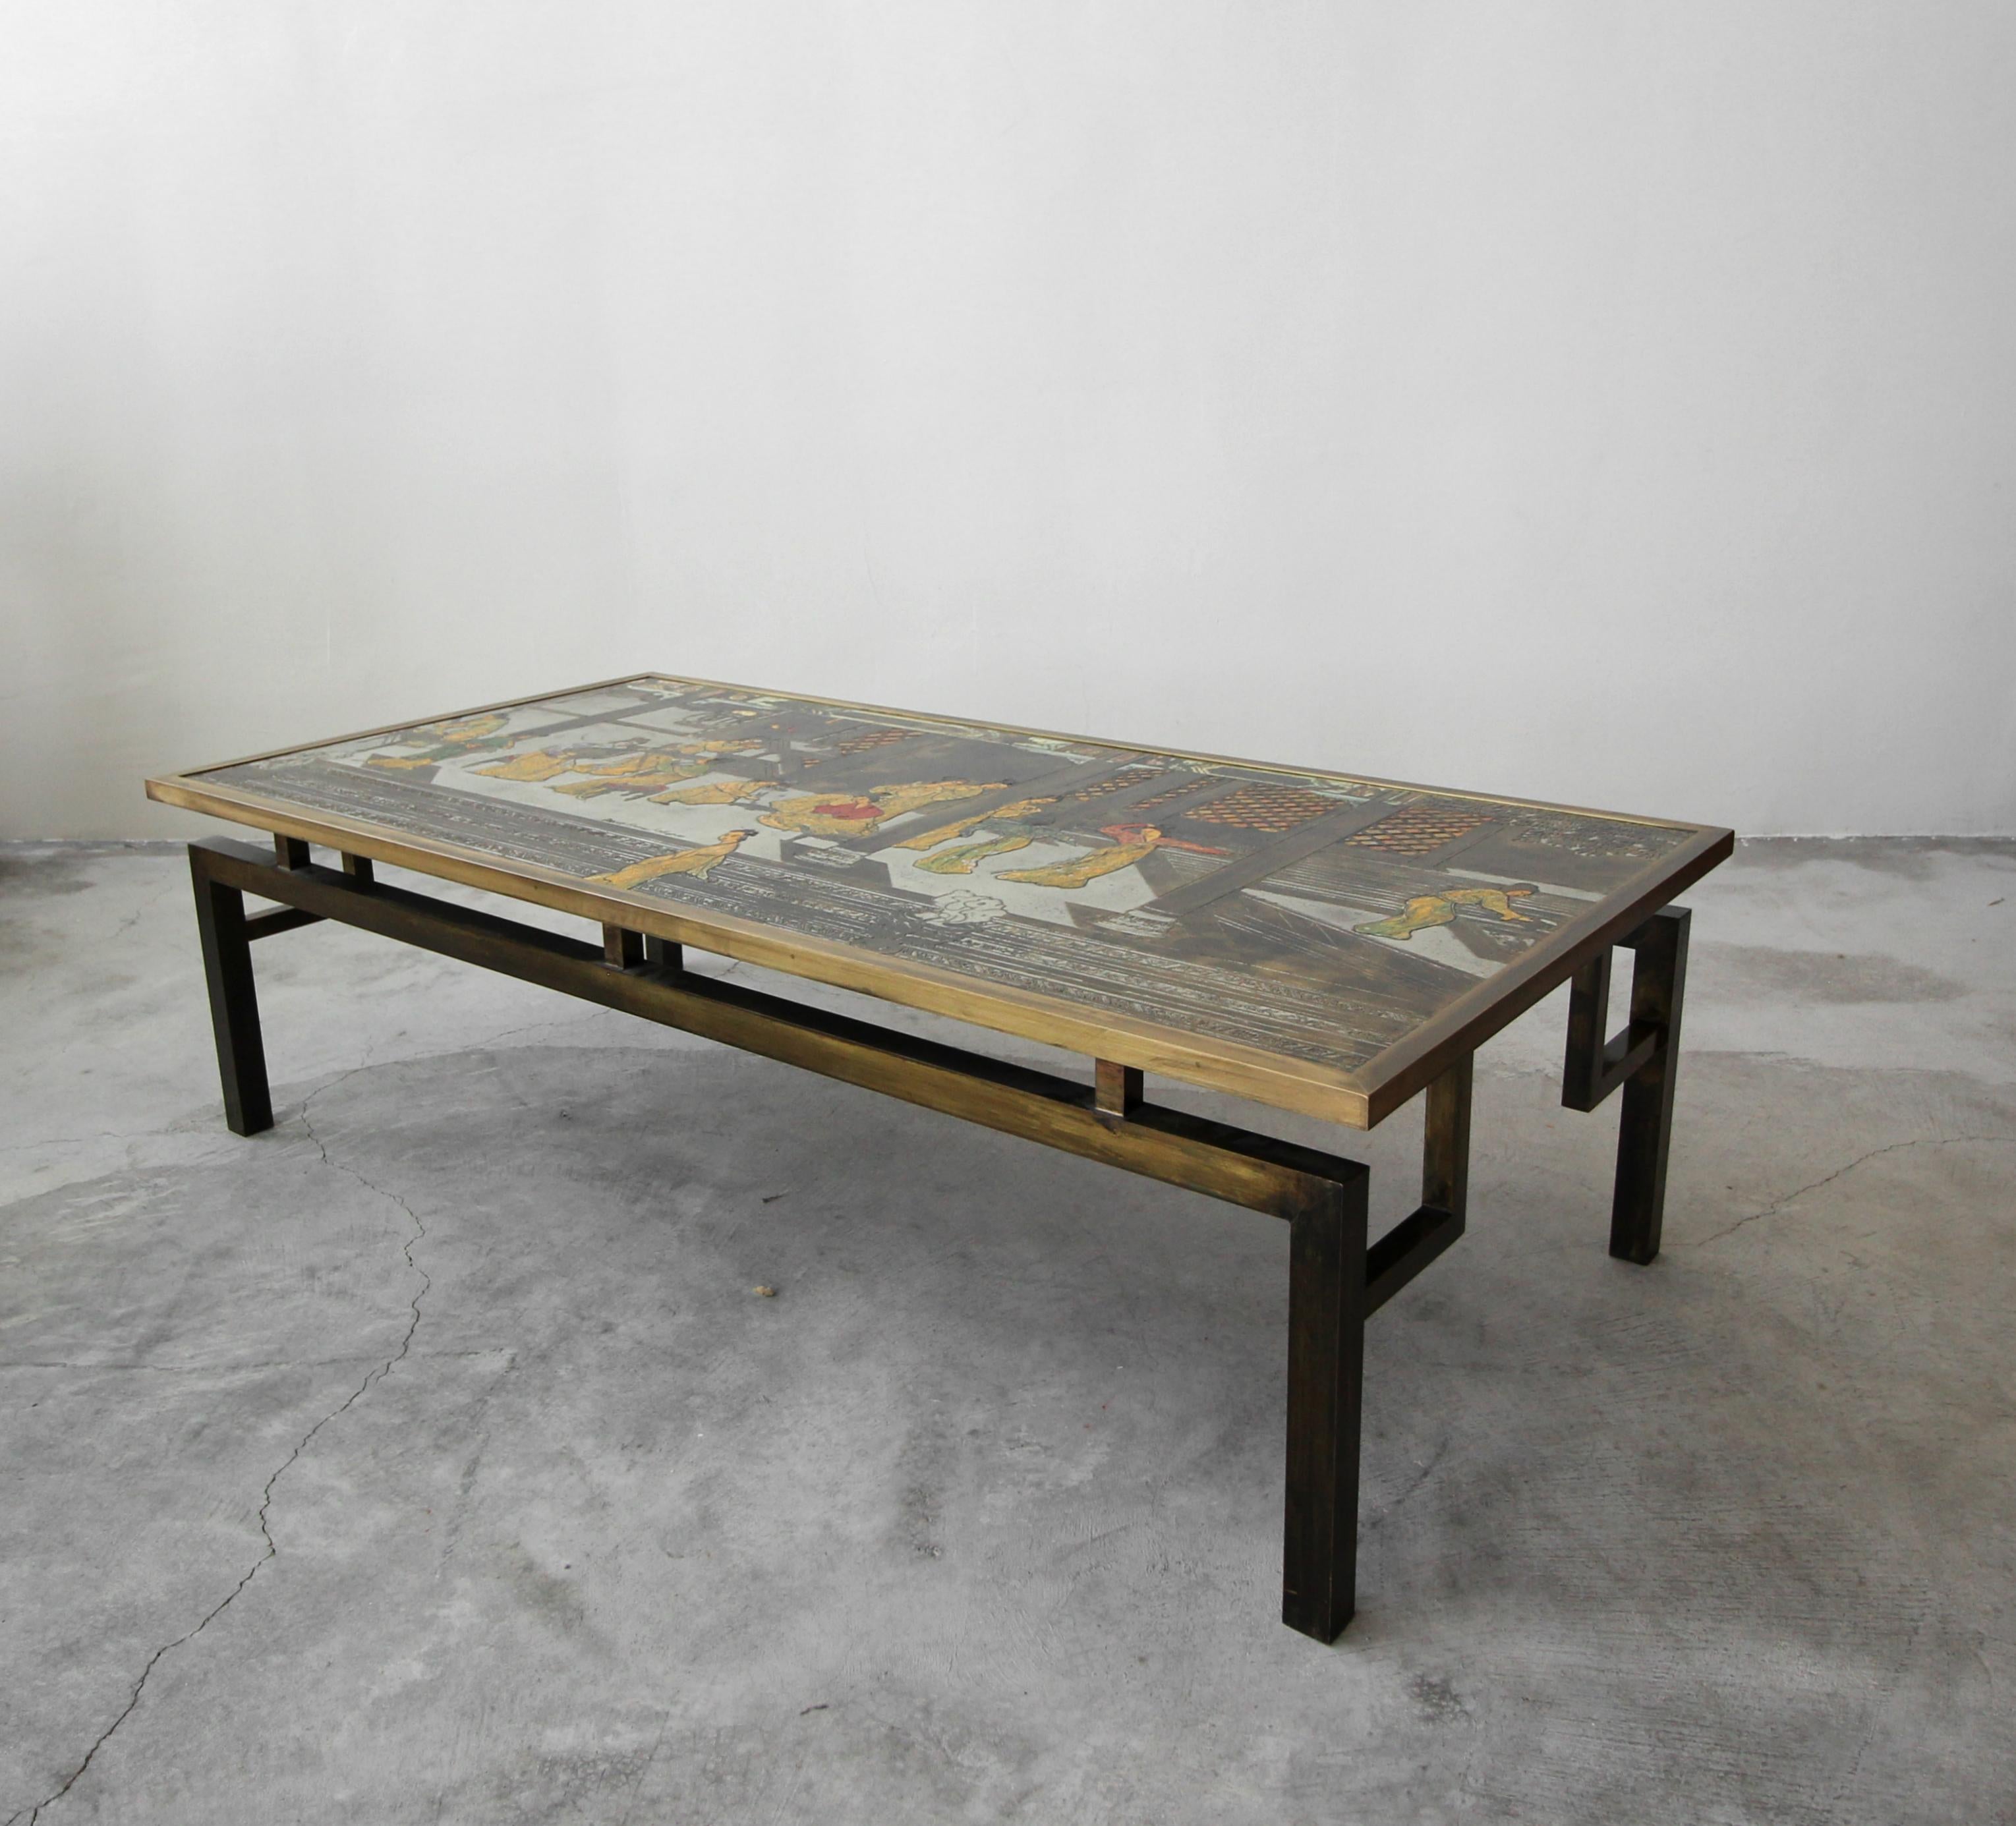 Rare signed bronze Chin Ying coffee table by Philip and Kelvin LaVerne. Table features beautifully patinated, etched bronze and pewter with hand applied enamel.

The table is in overall excellent condition with age appropriate patina. As typical